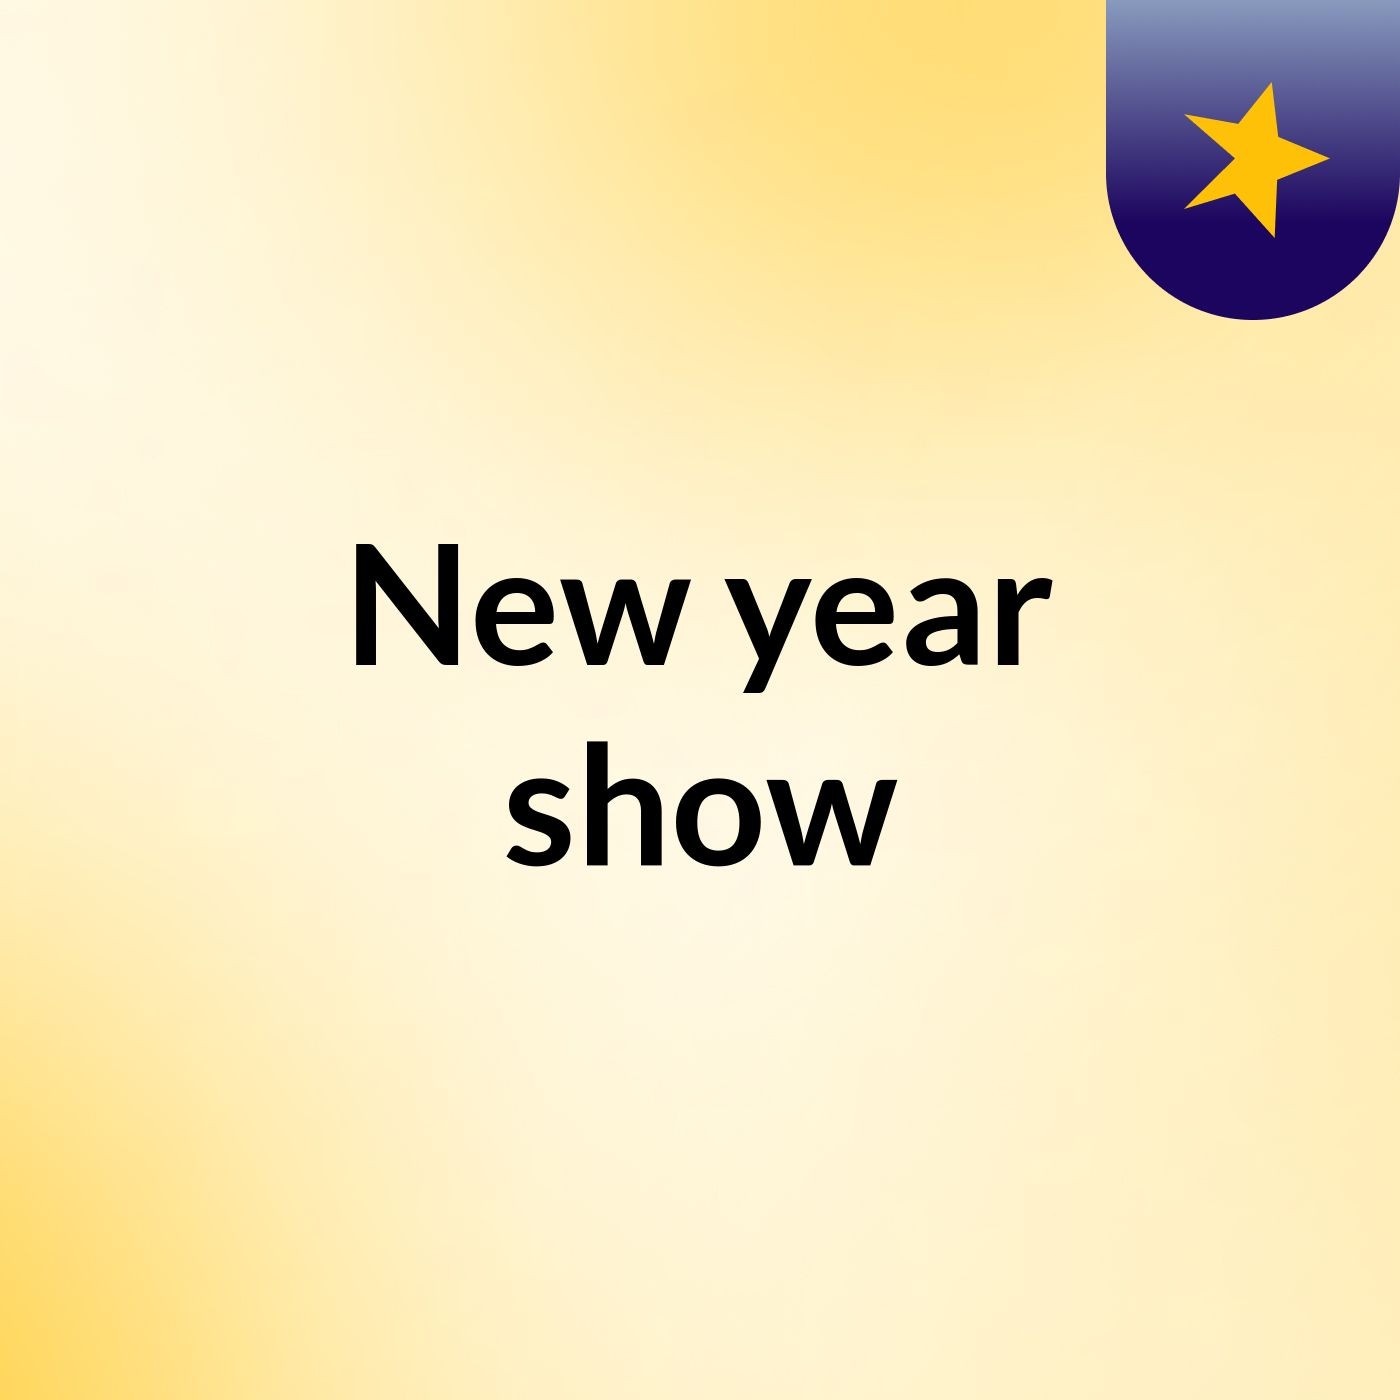 New year show